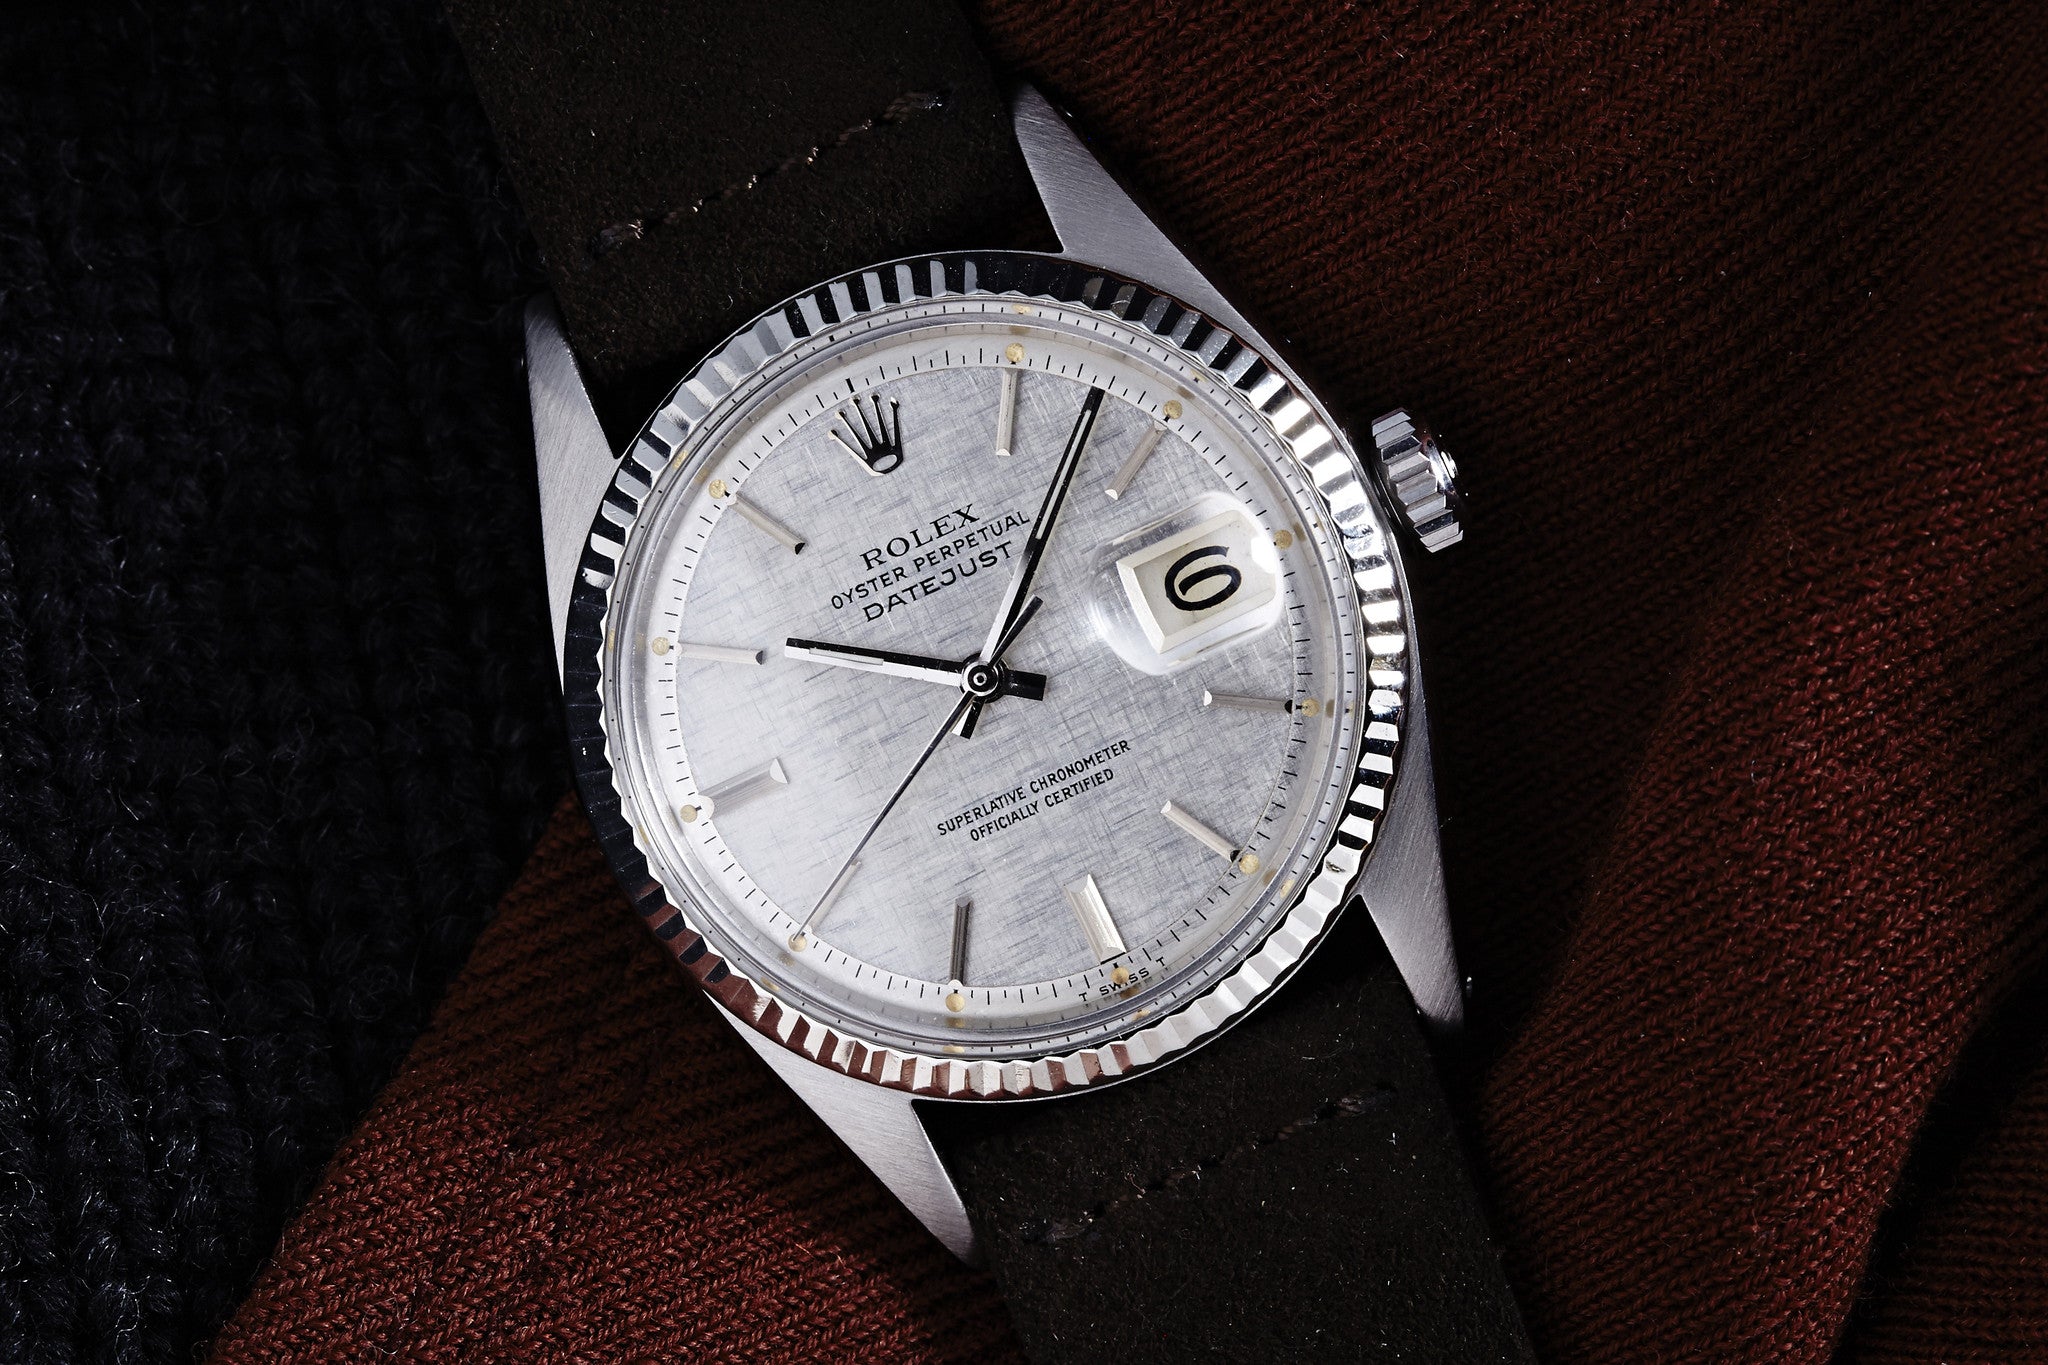 Rolex Datejust Reference 1601 Linen Dial - 1973